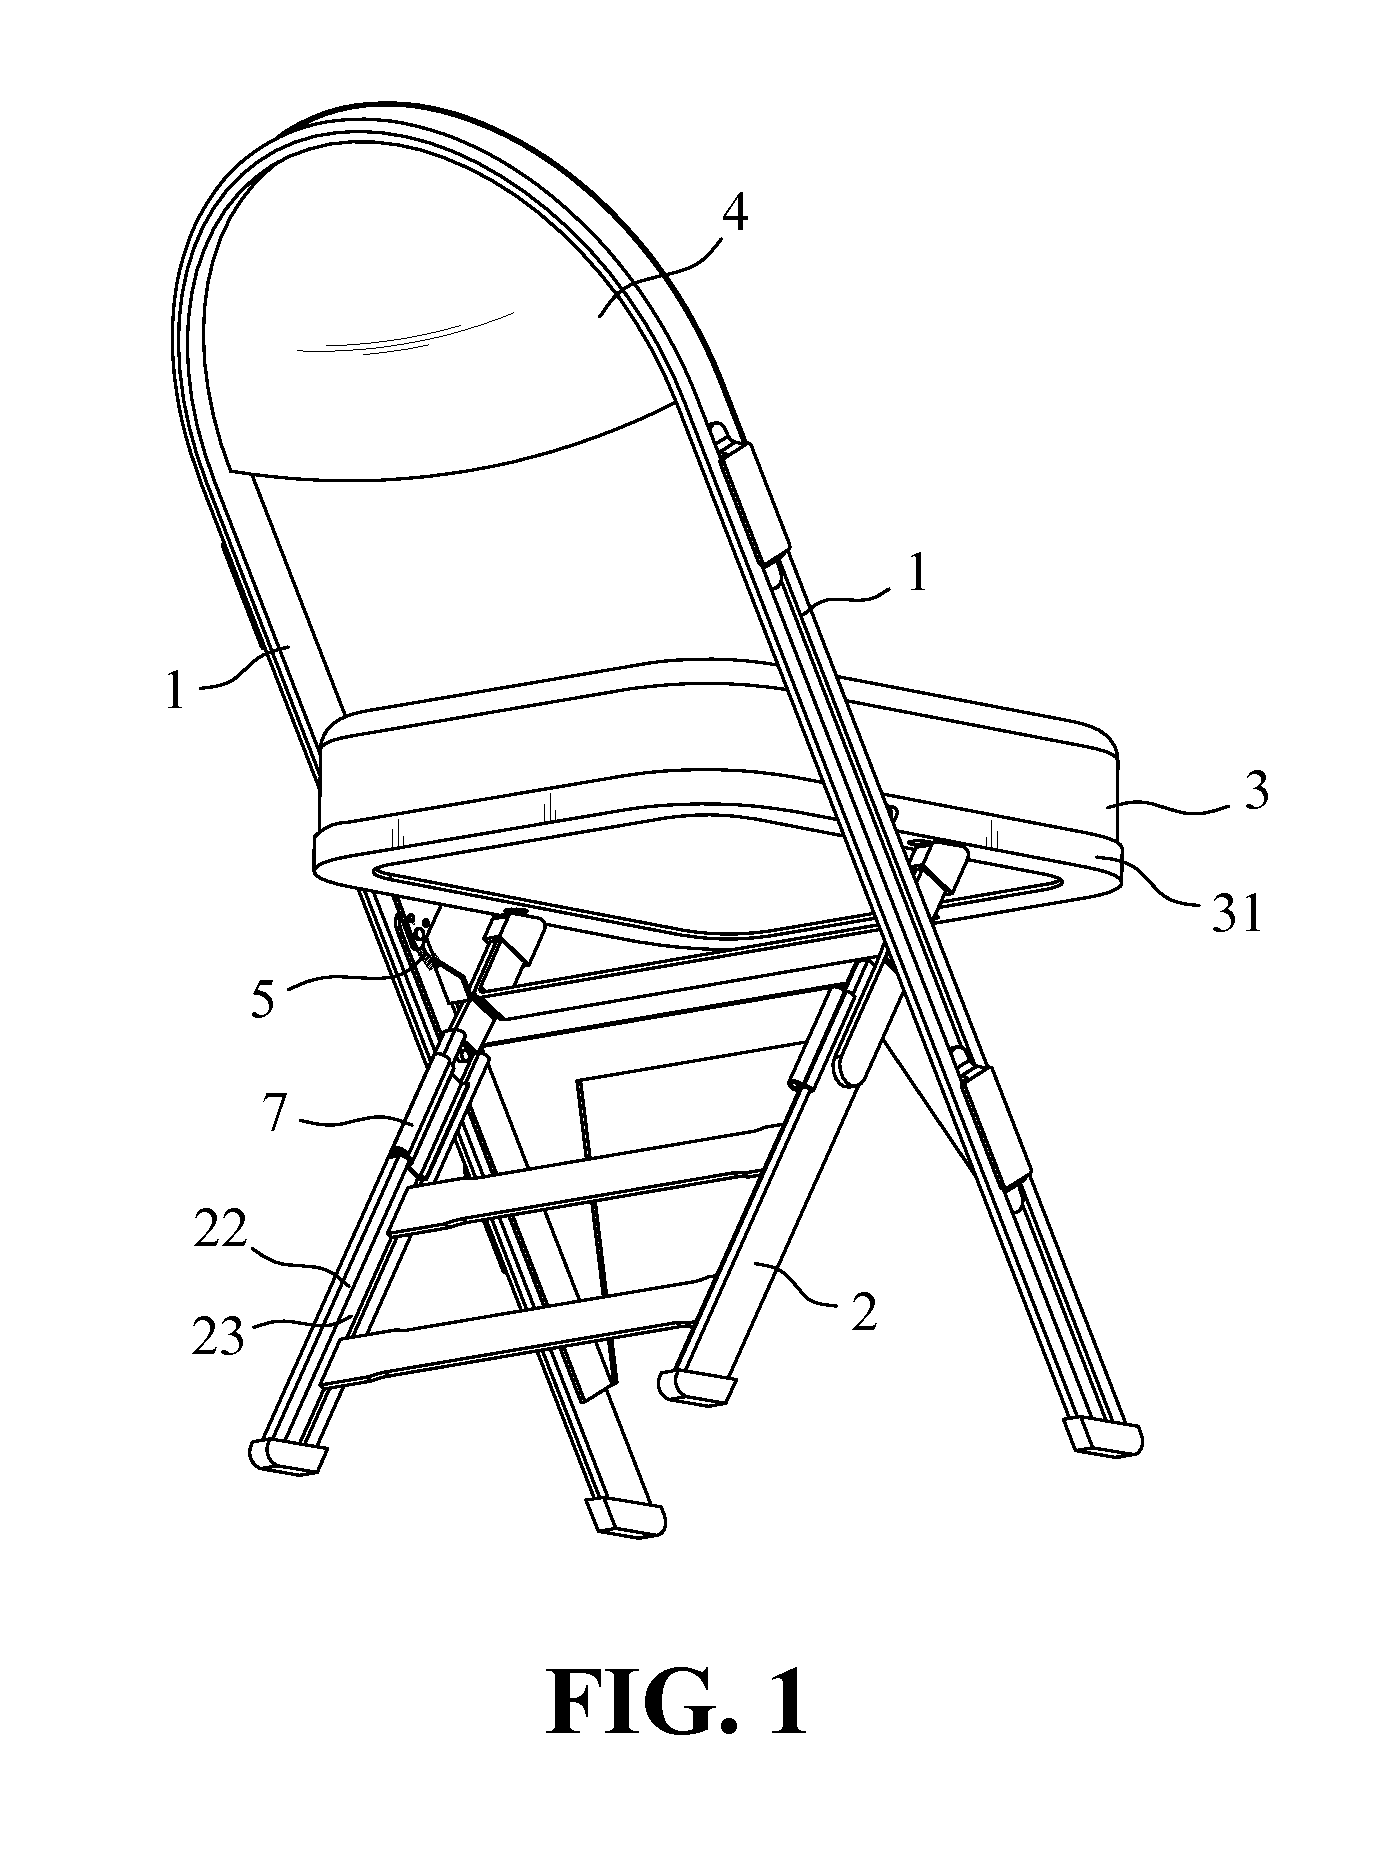 Mechanism for self folding up and cushing a seat of portable chair